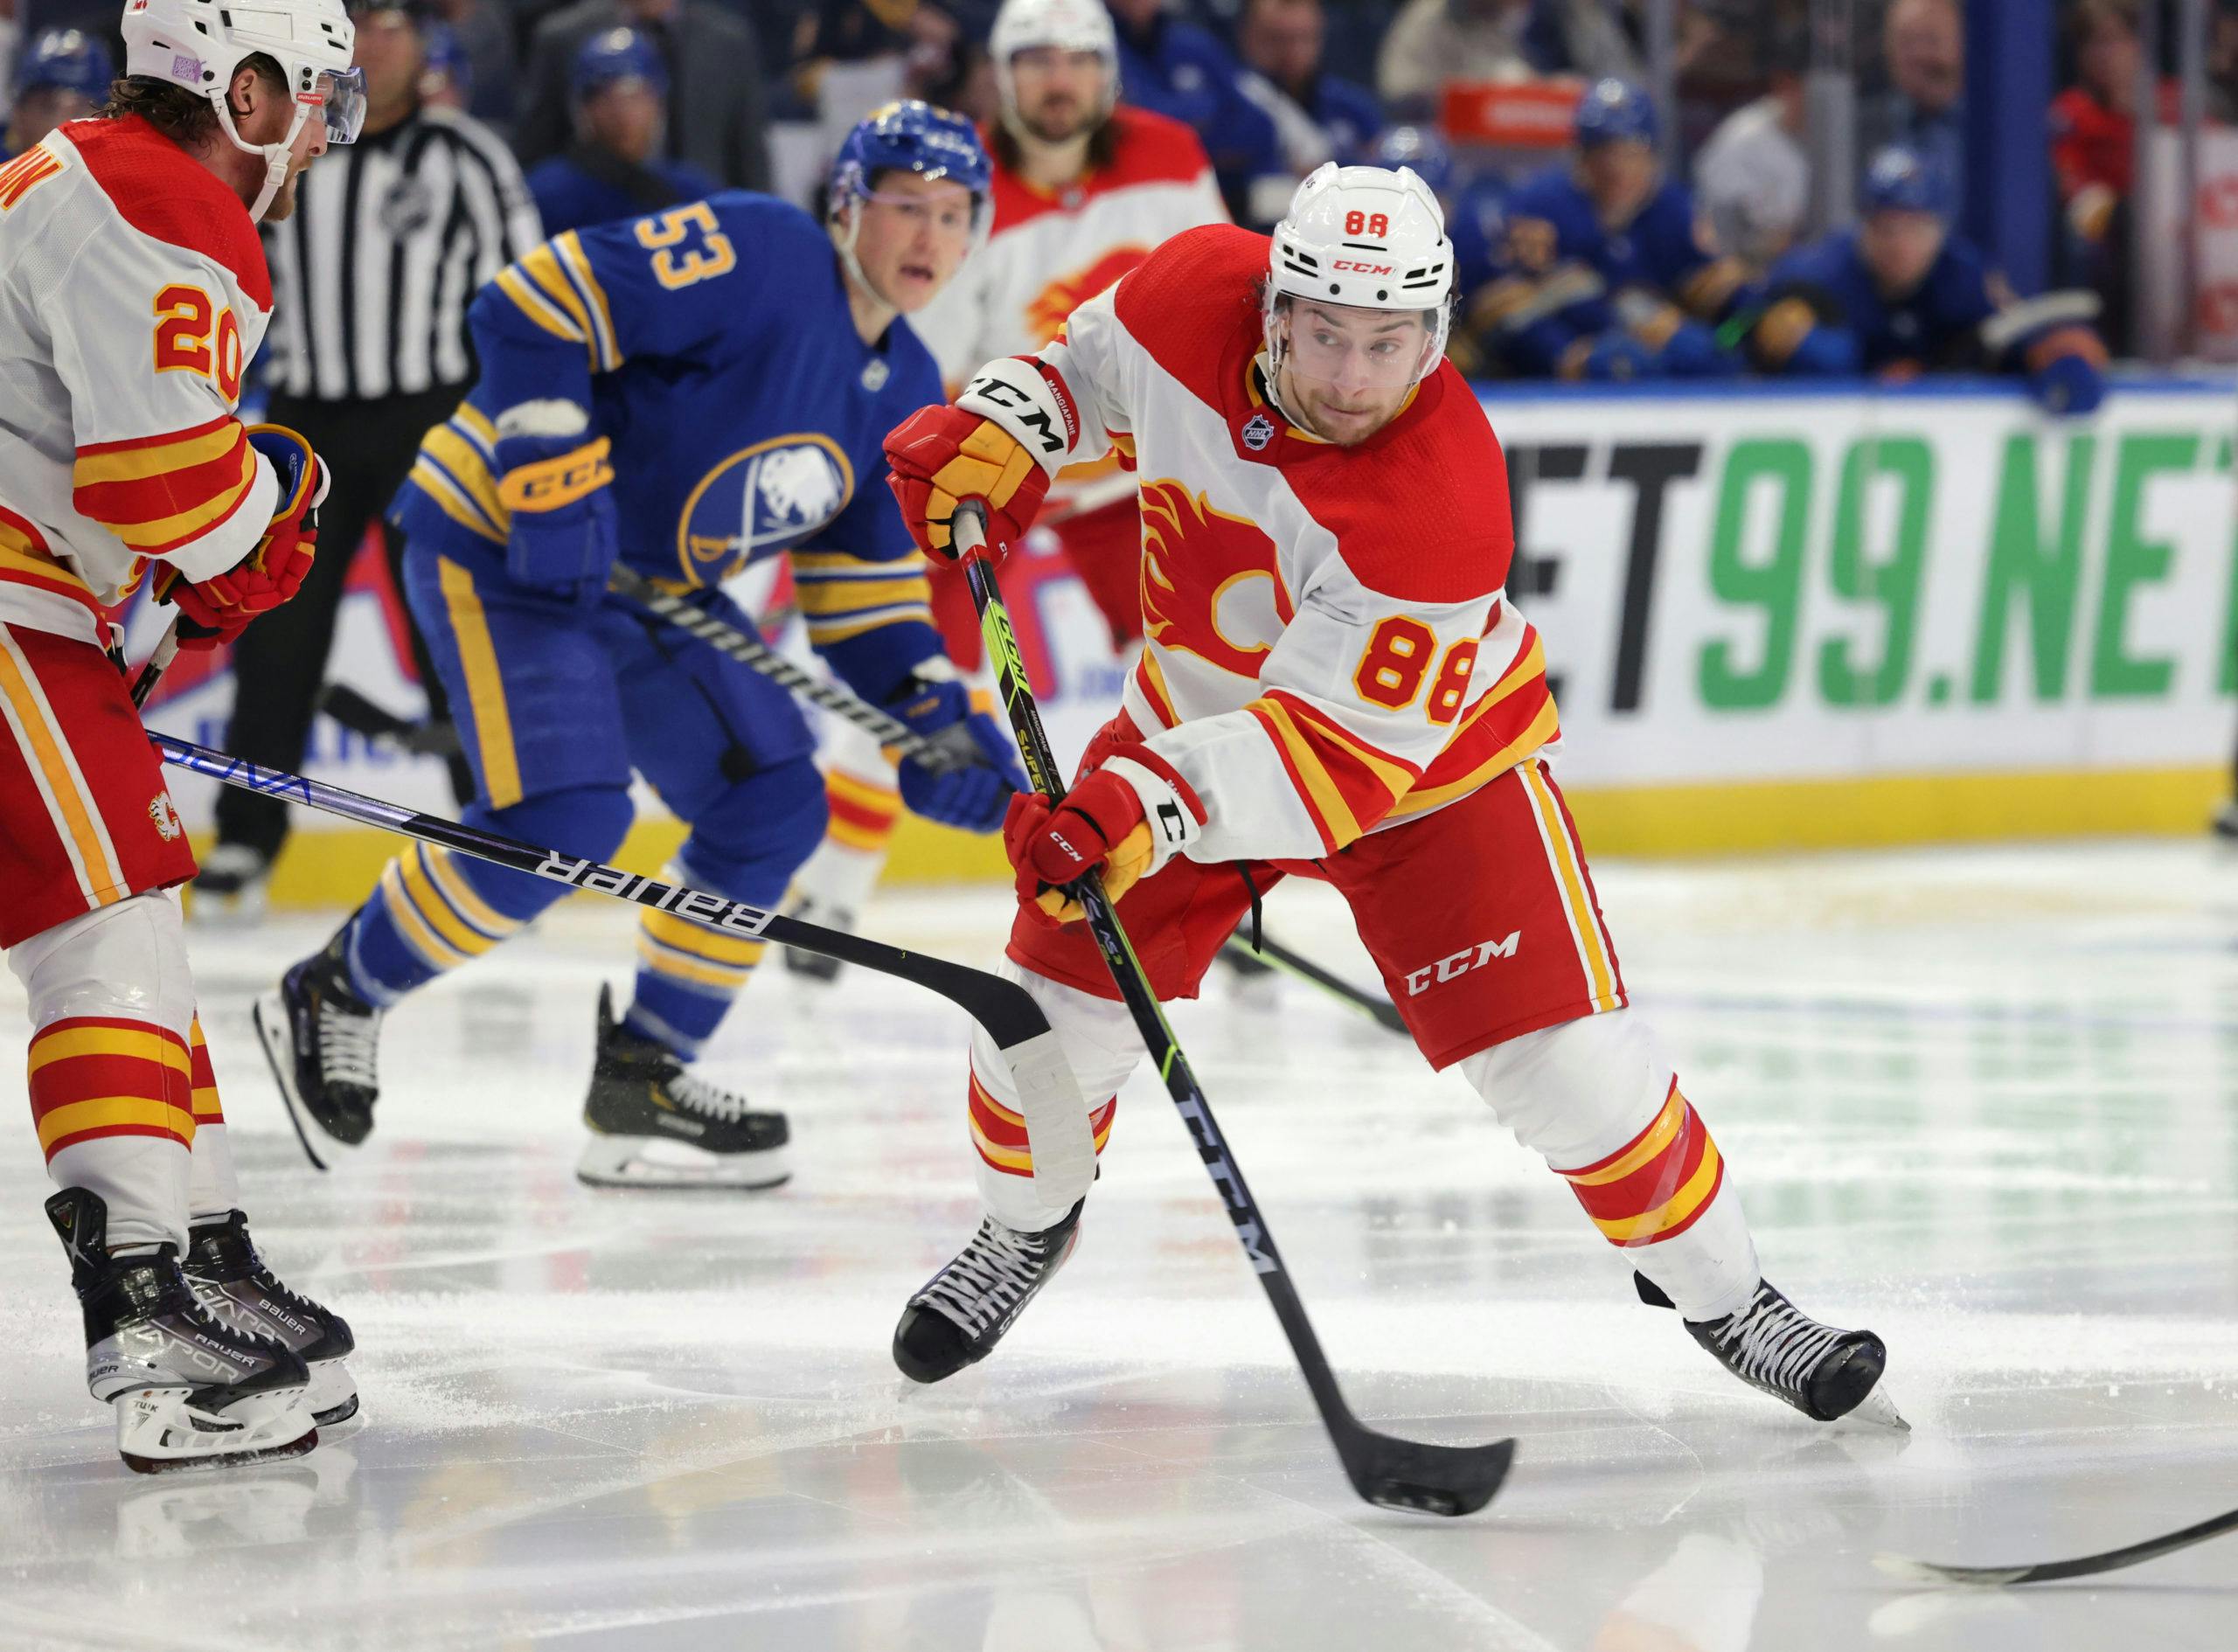 Flames: What Will Andrew Mangiapane's Next Contract Look Like?